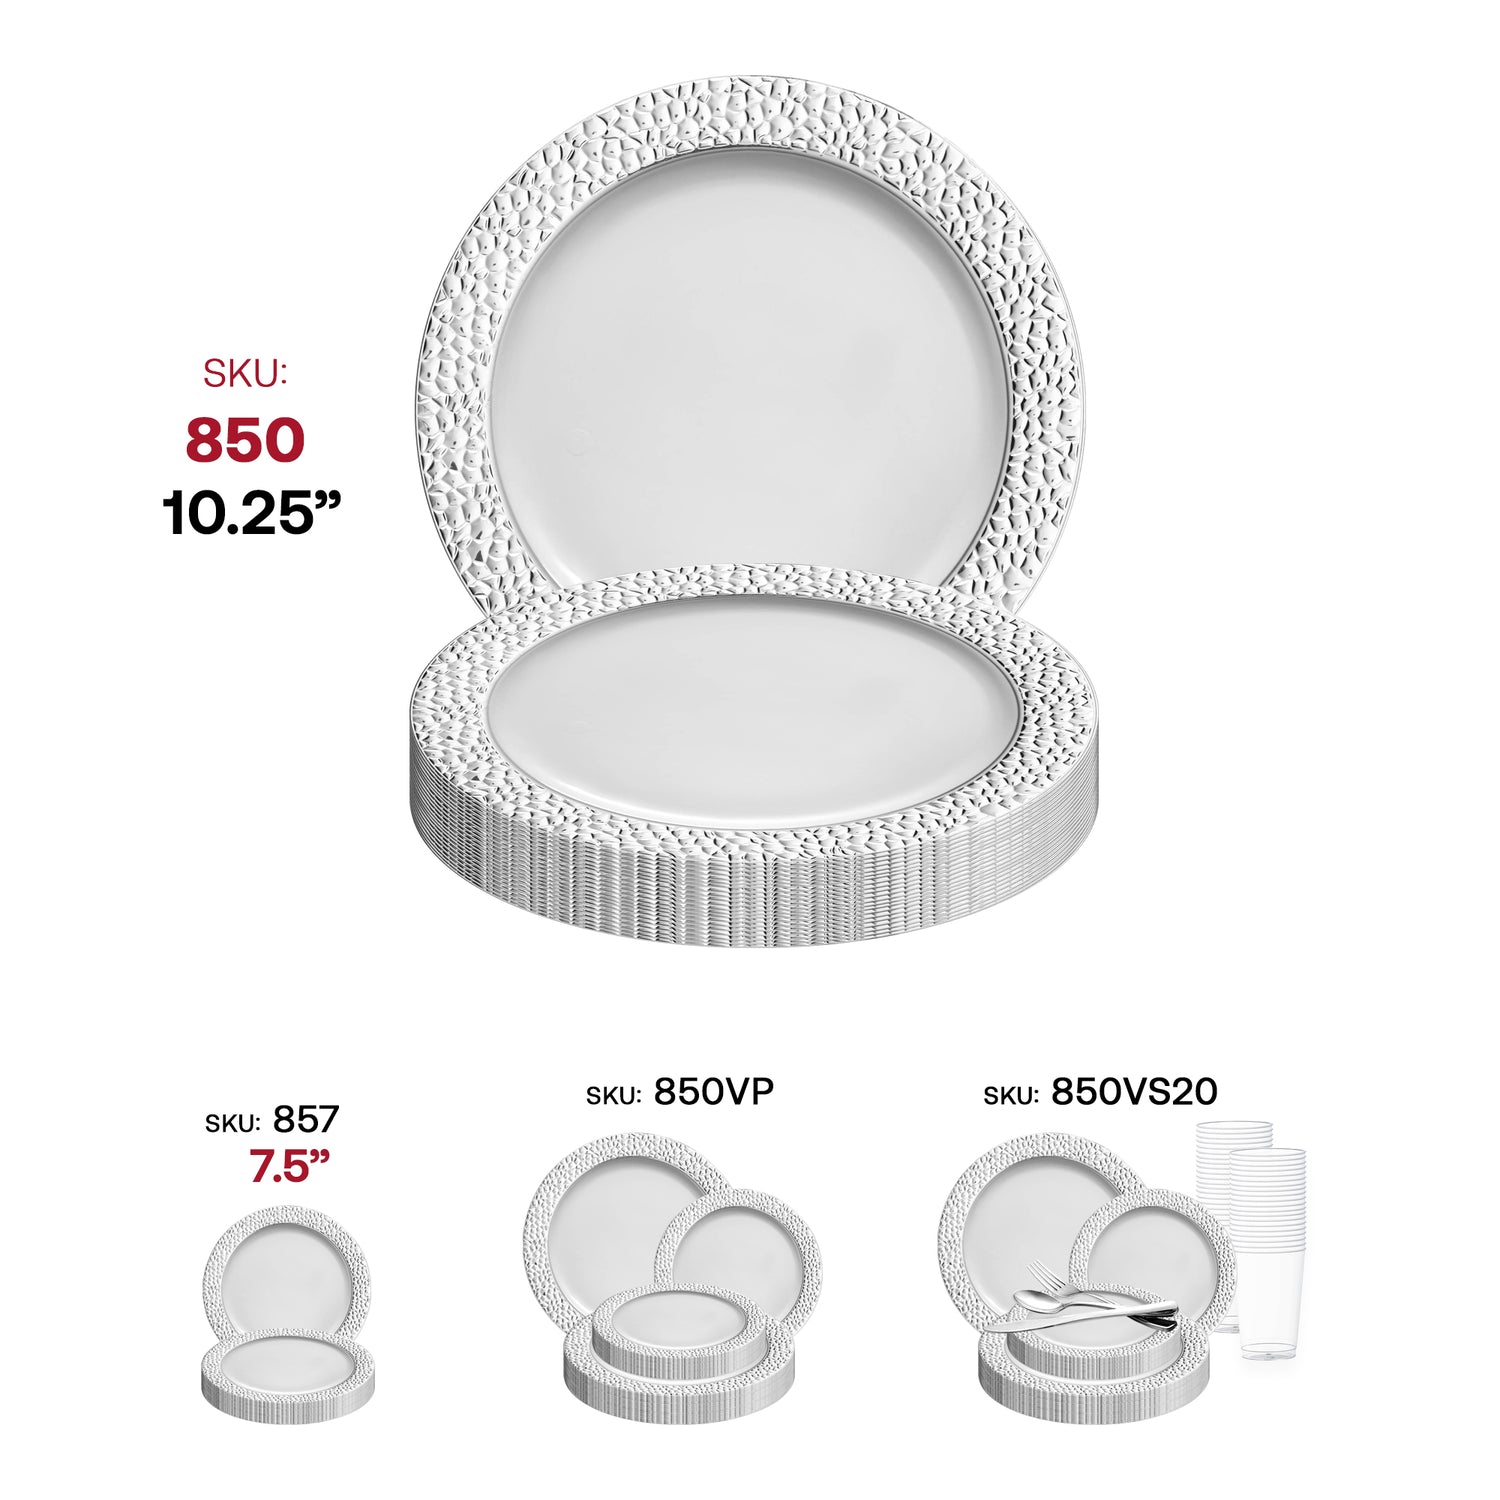 White with Silver Hammered Rim Round Disposable Plastic Dinner Plates (10.25") SKU | The Kaya Collection